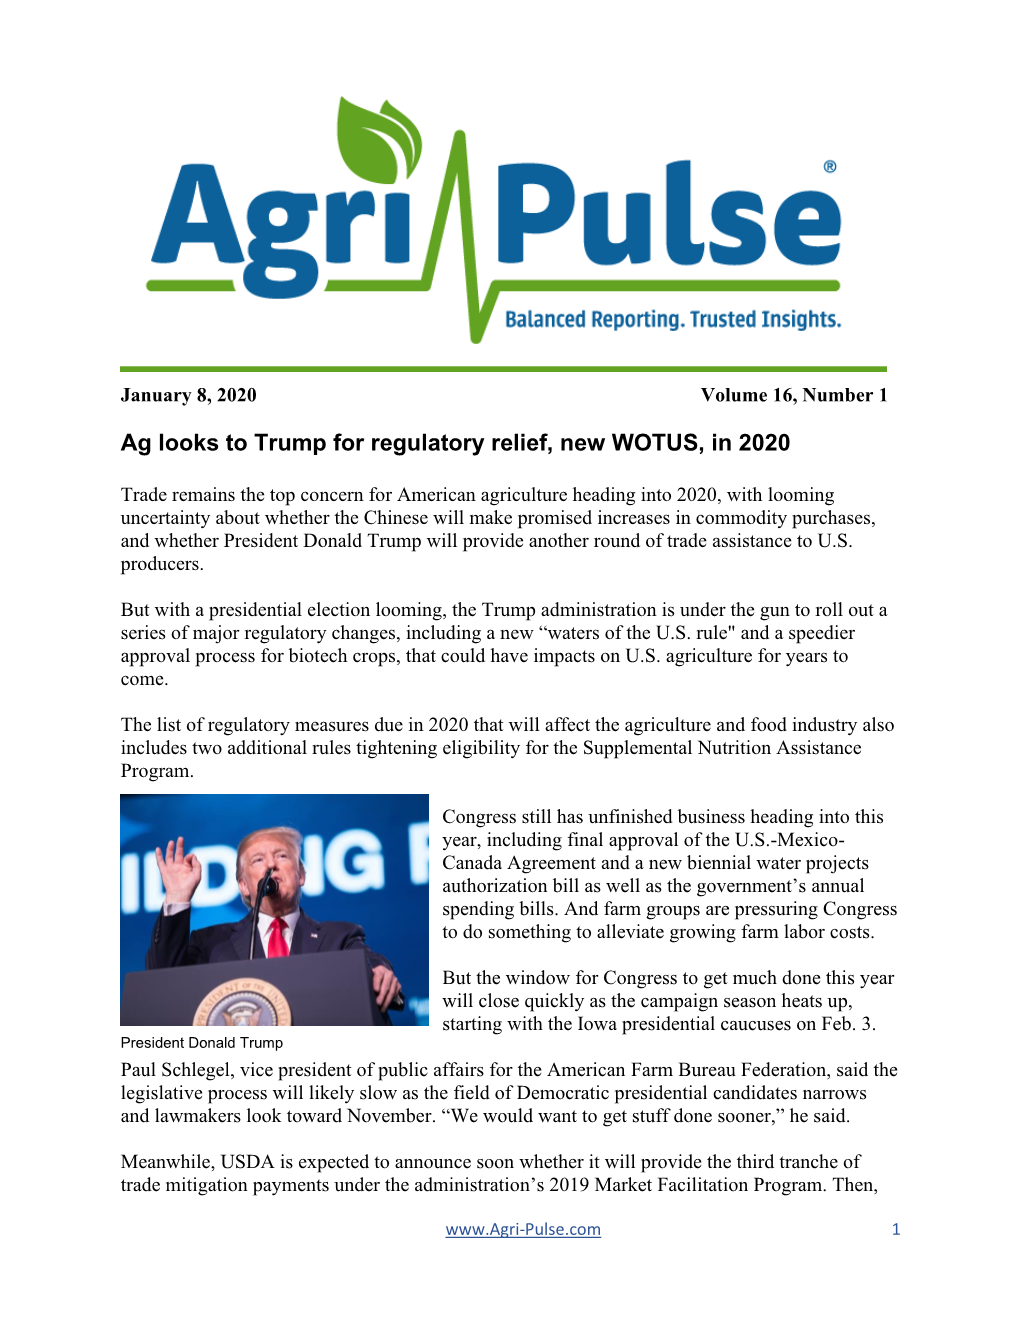 Ag Looks to Trump for Regulatory Relief, New WOTUS, in 2020